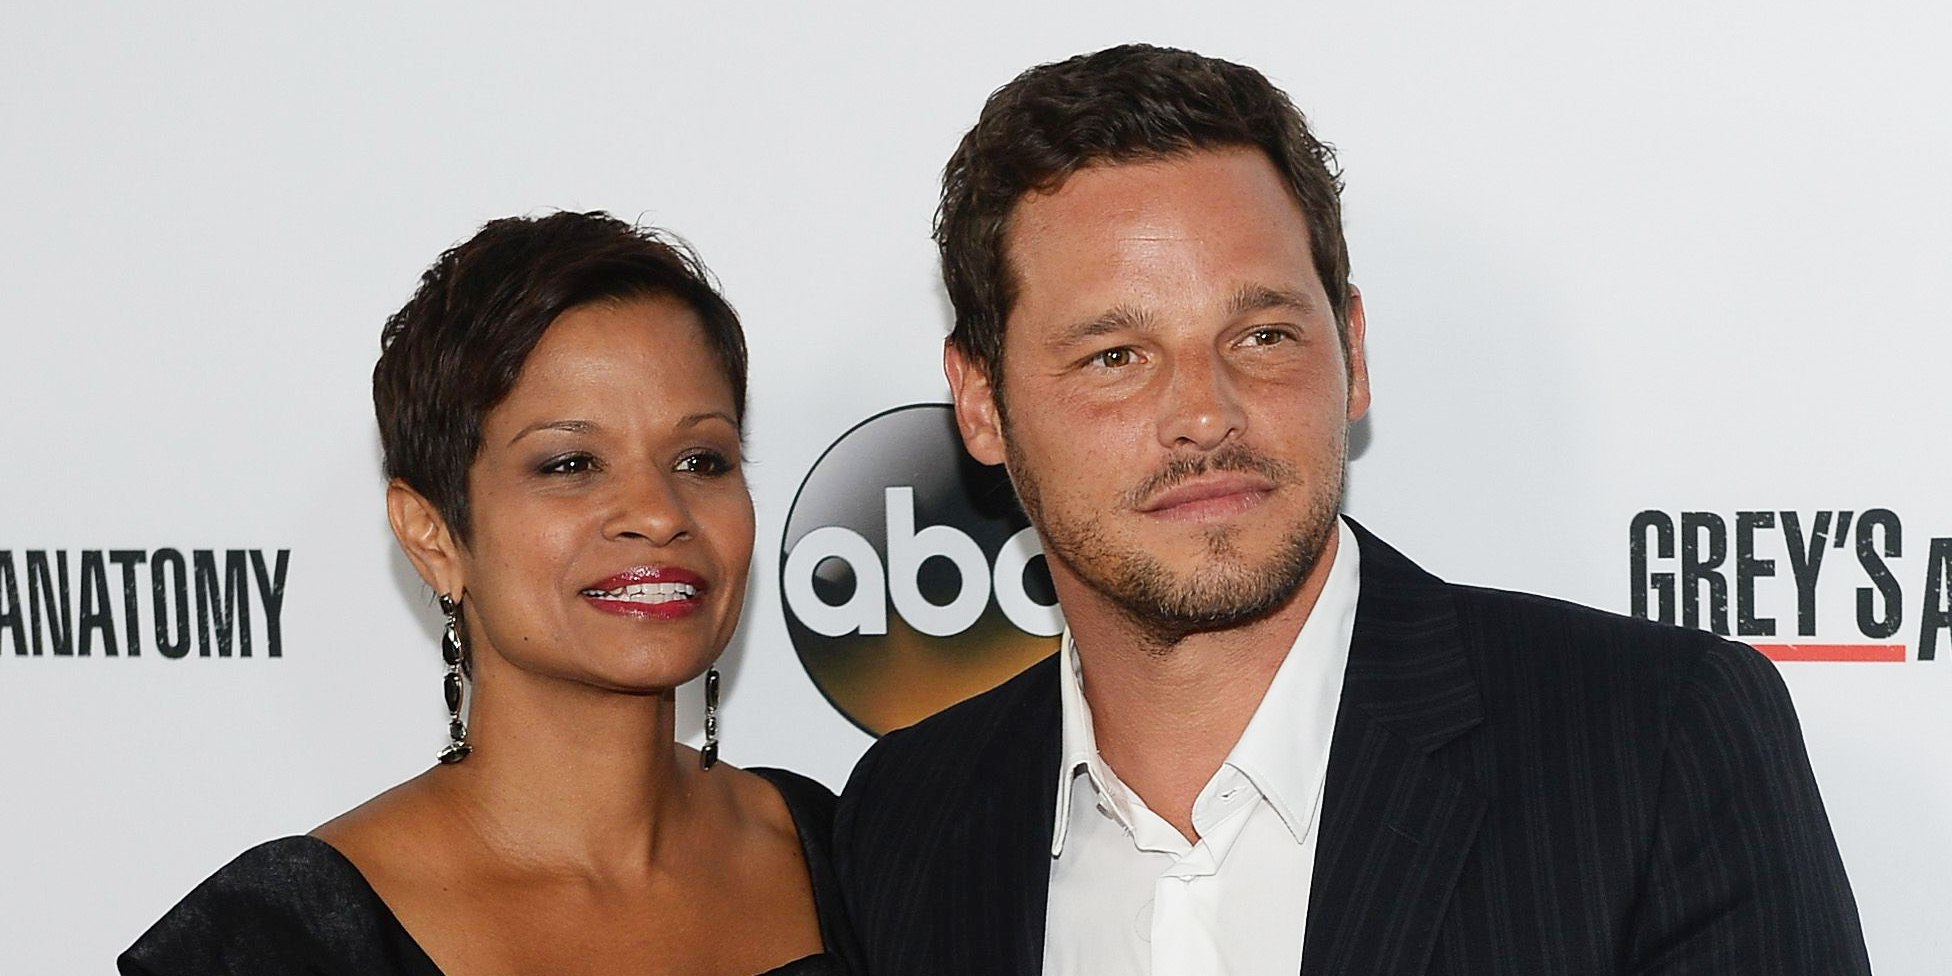 Keisha Chambers wearing a black outfit with her husband, Justin Chambers wearing suit